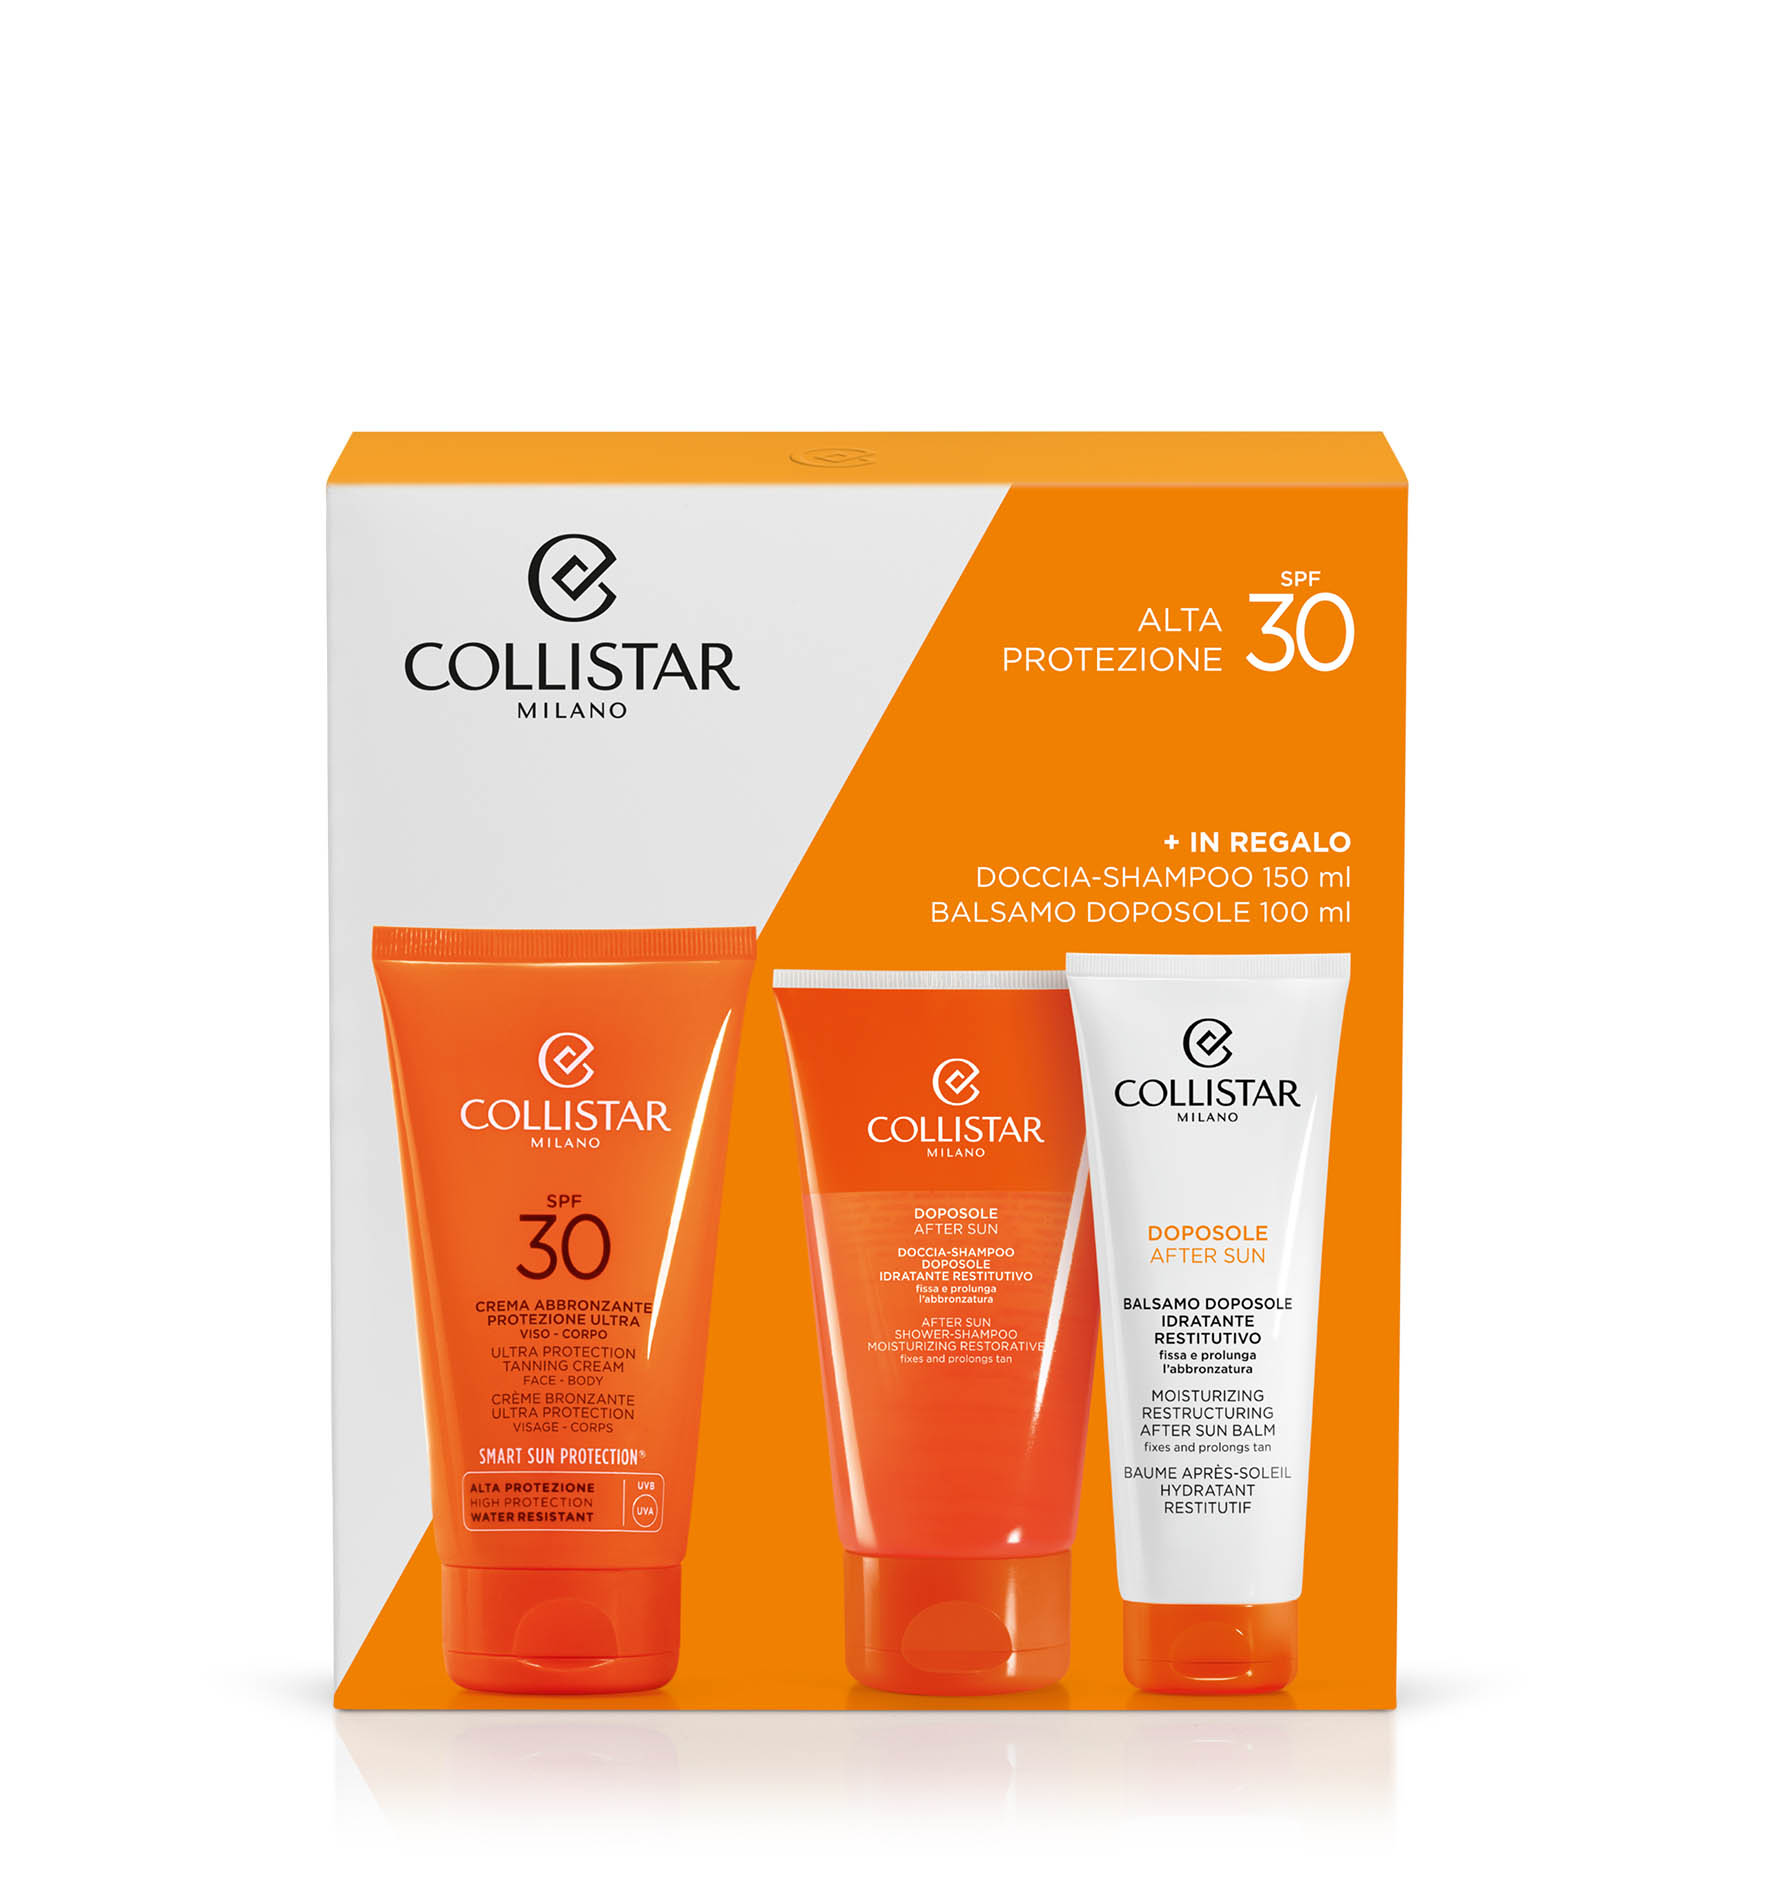 SET ULTRA PROTECTION TANNING CREAM FACE-BODY SPF 30 - High Protection SPF 30-50+ | Collistar - Shop Online Ufficiale